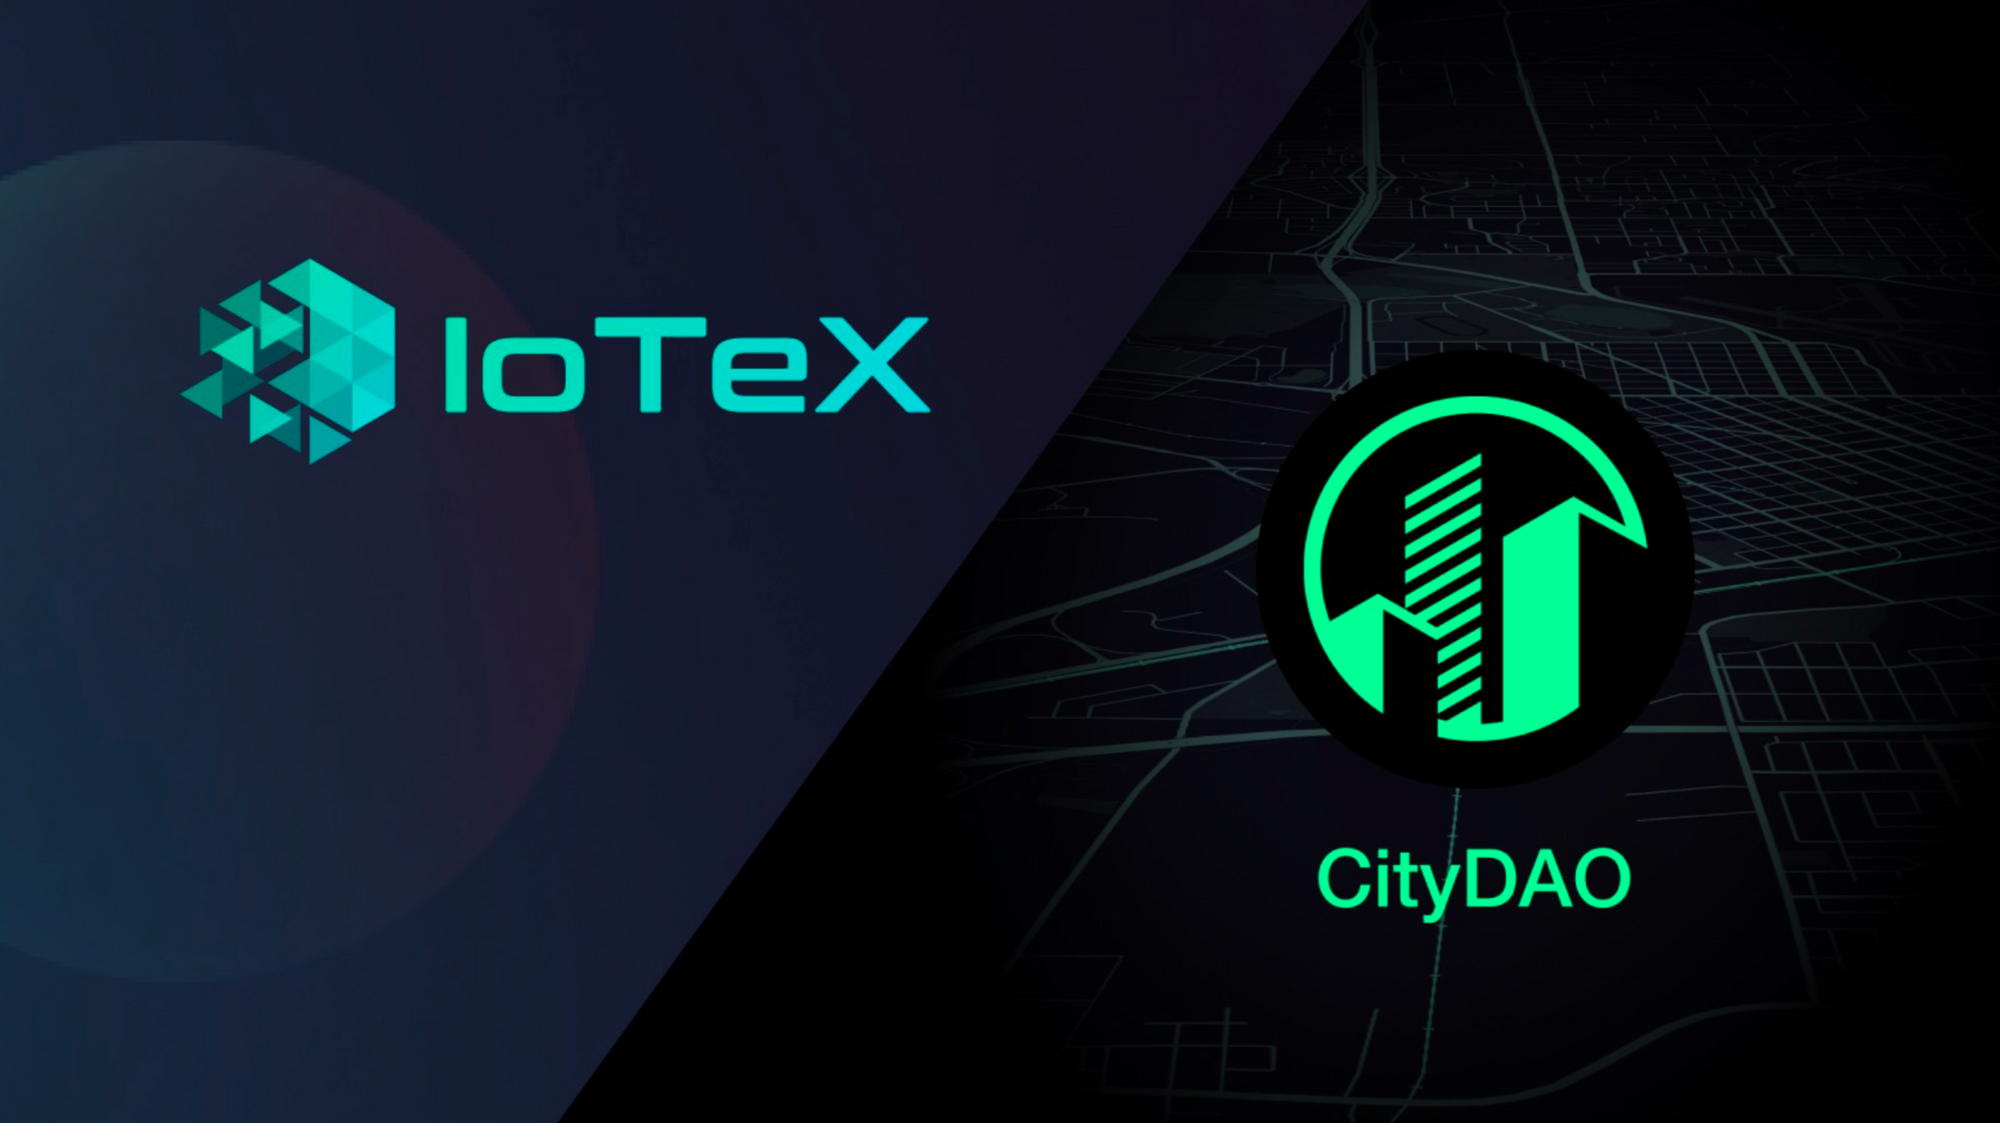 CityDAO Brings Real World to Web3 with IoTeX’s Pebble Tracker